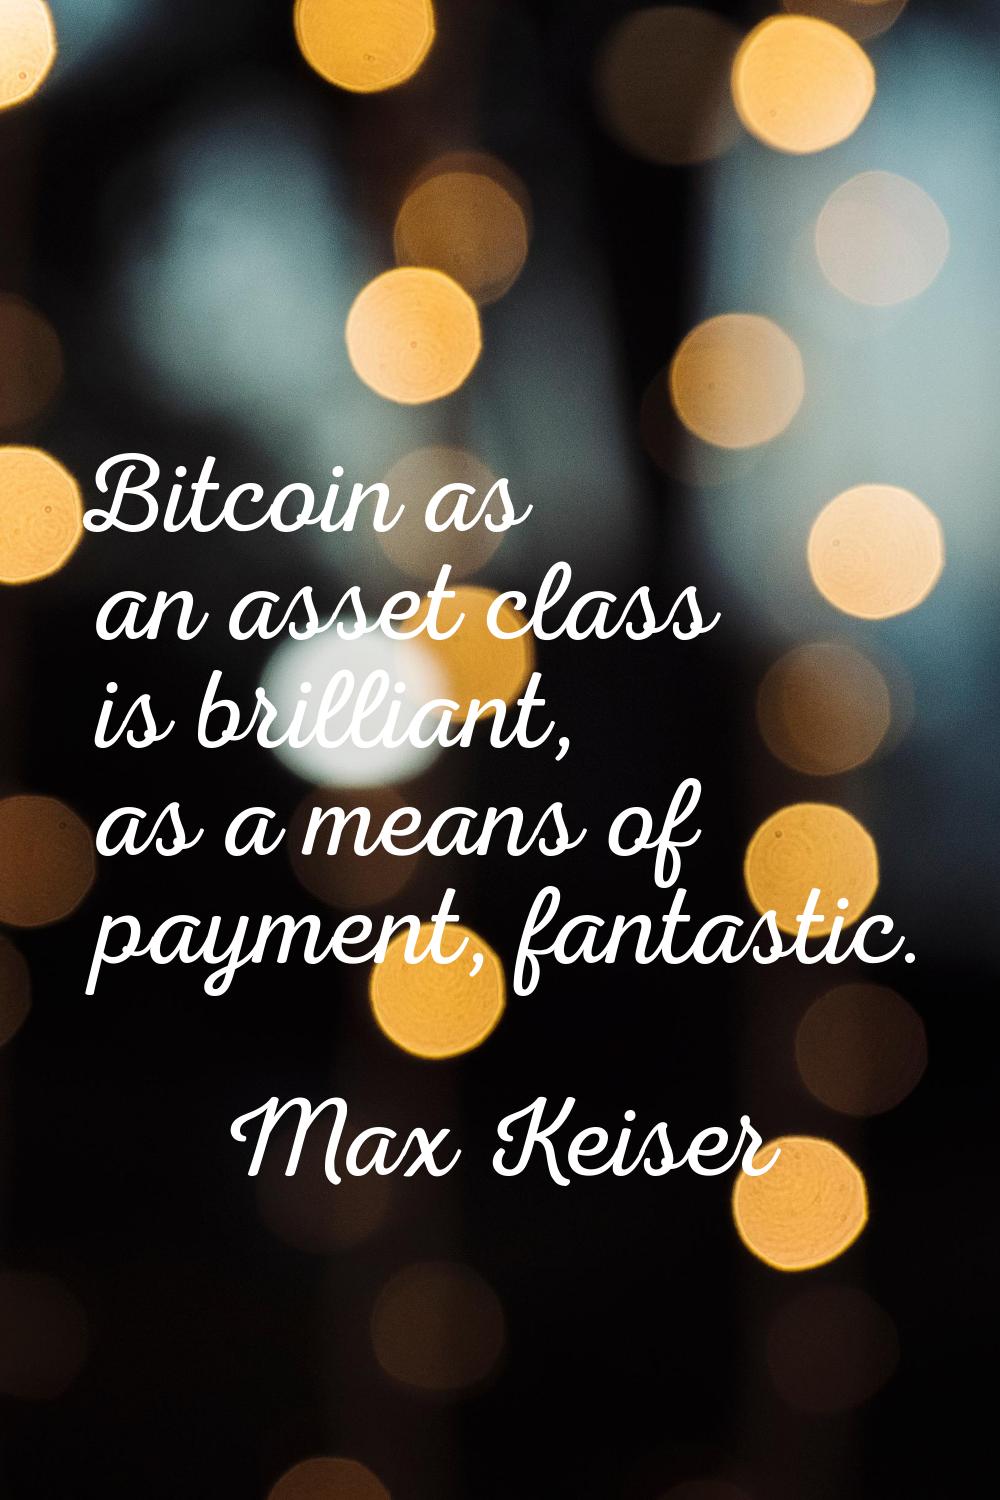 Bitcoin as an asset class is brilliant, as a means of payment, fantastic.